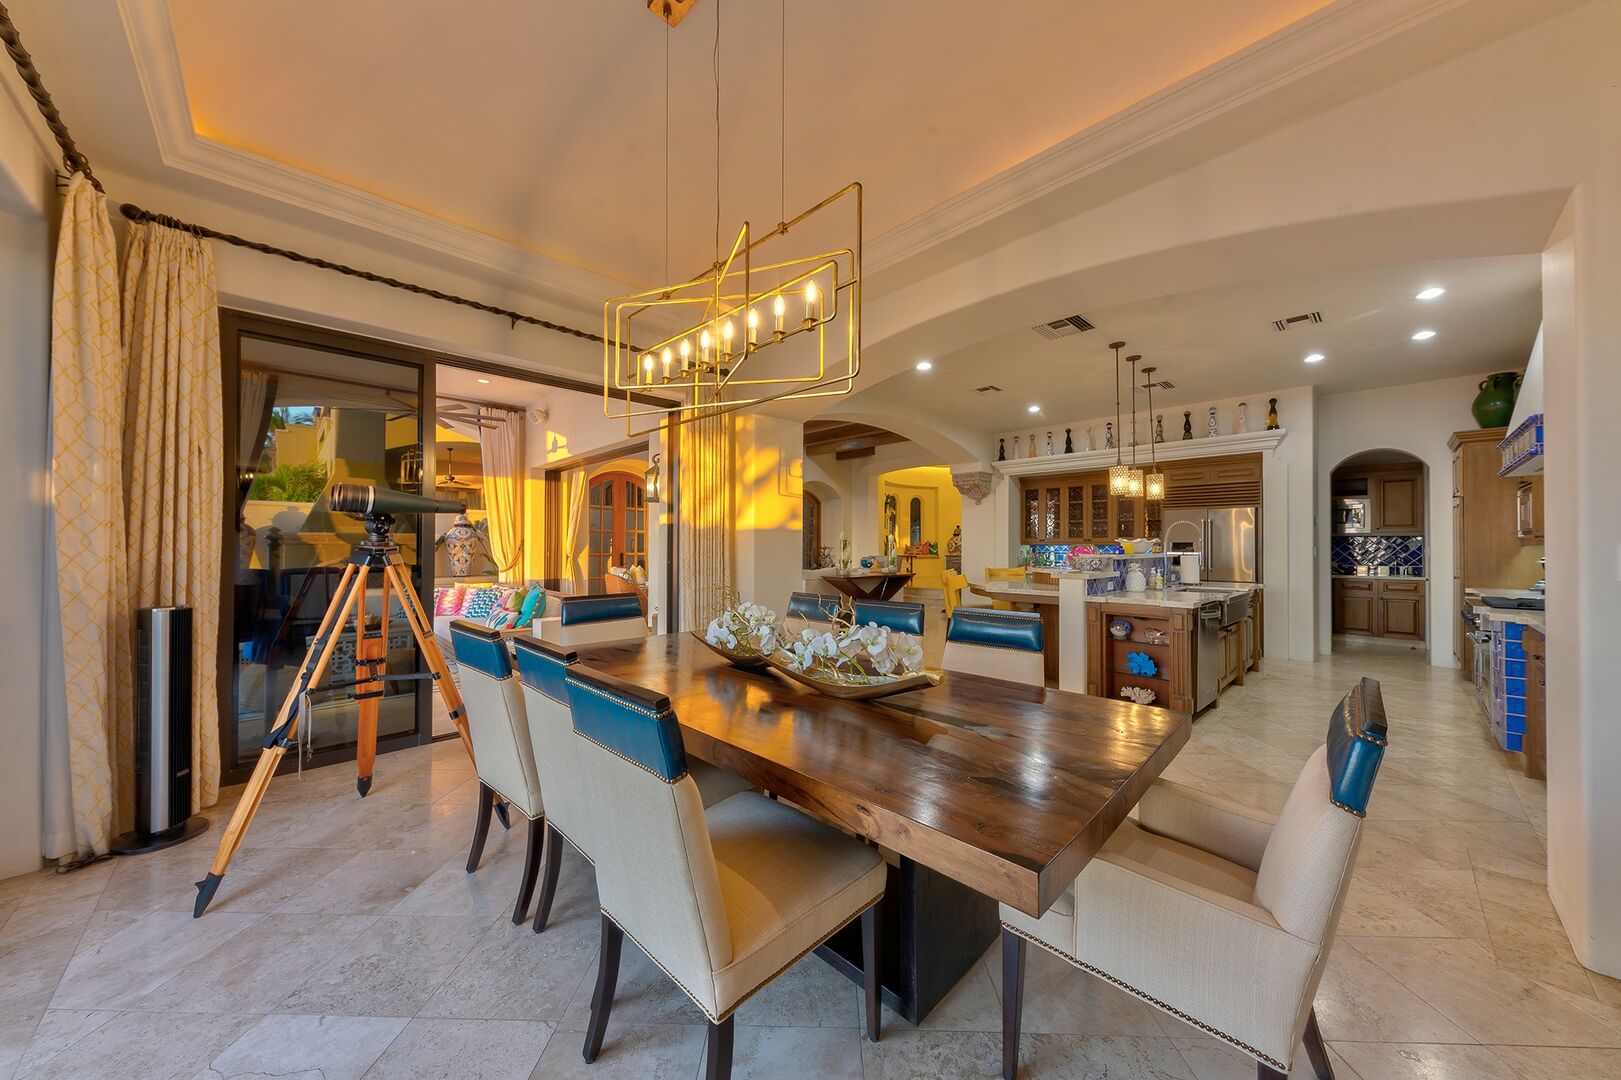 View of the kitchen from the dining table in this Los Cabos villa.